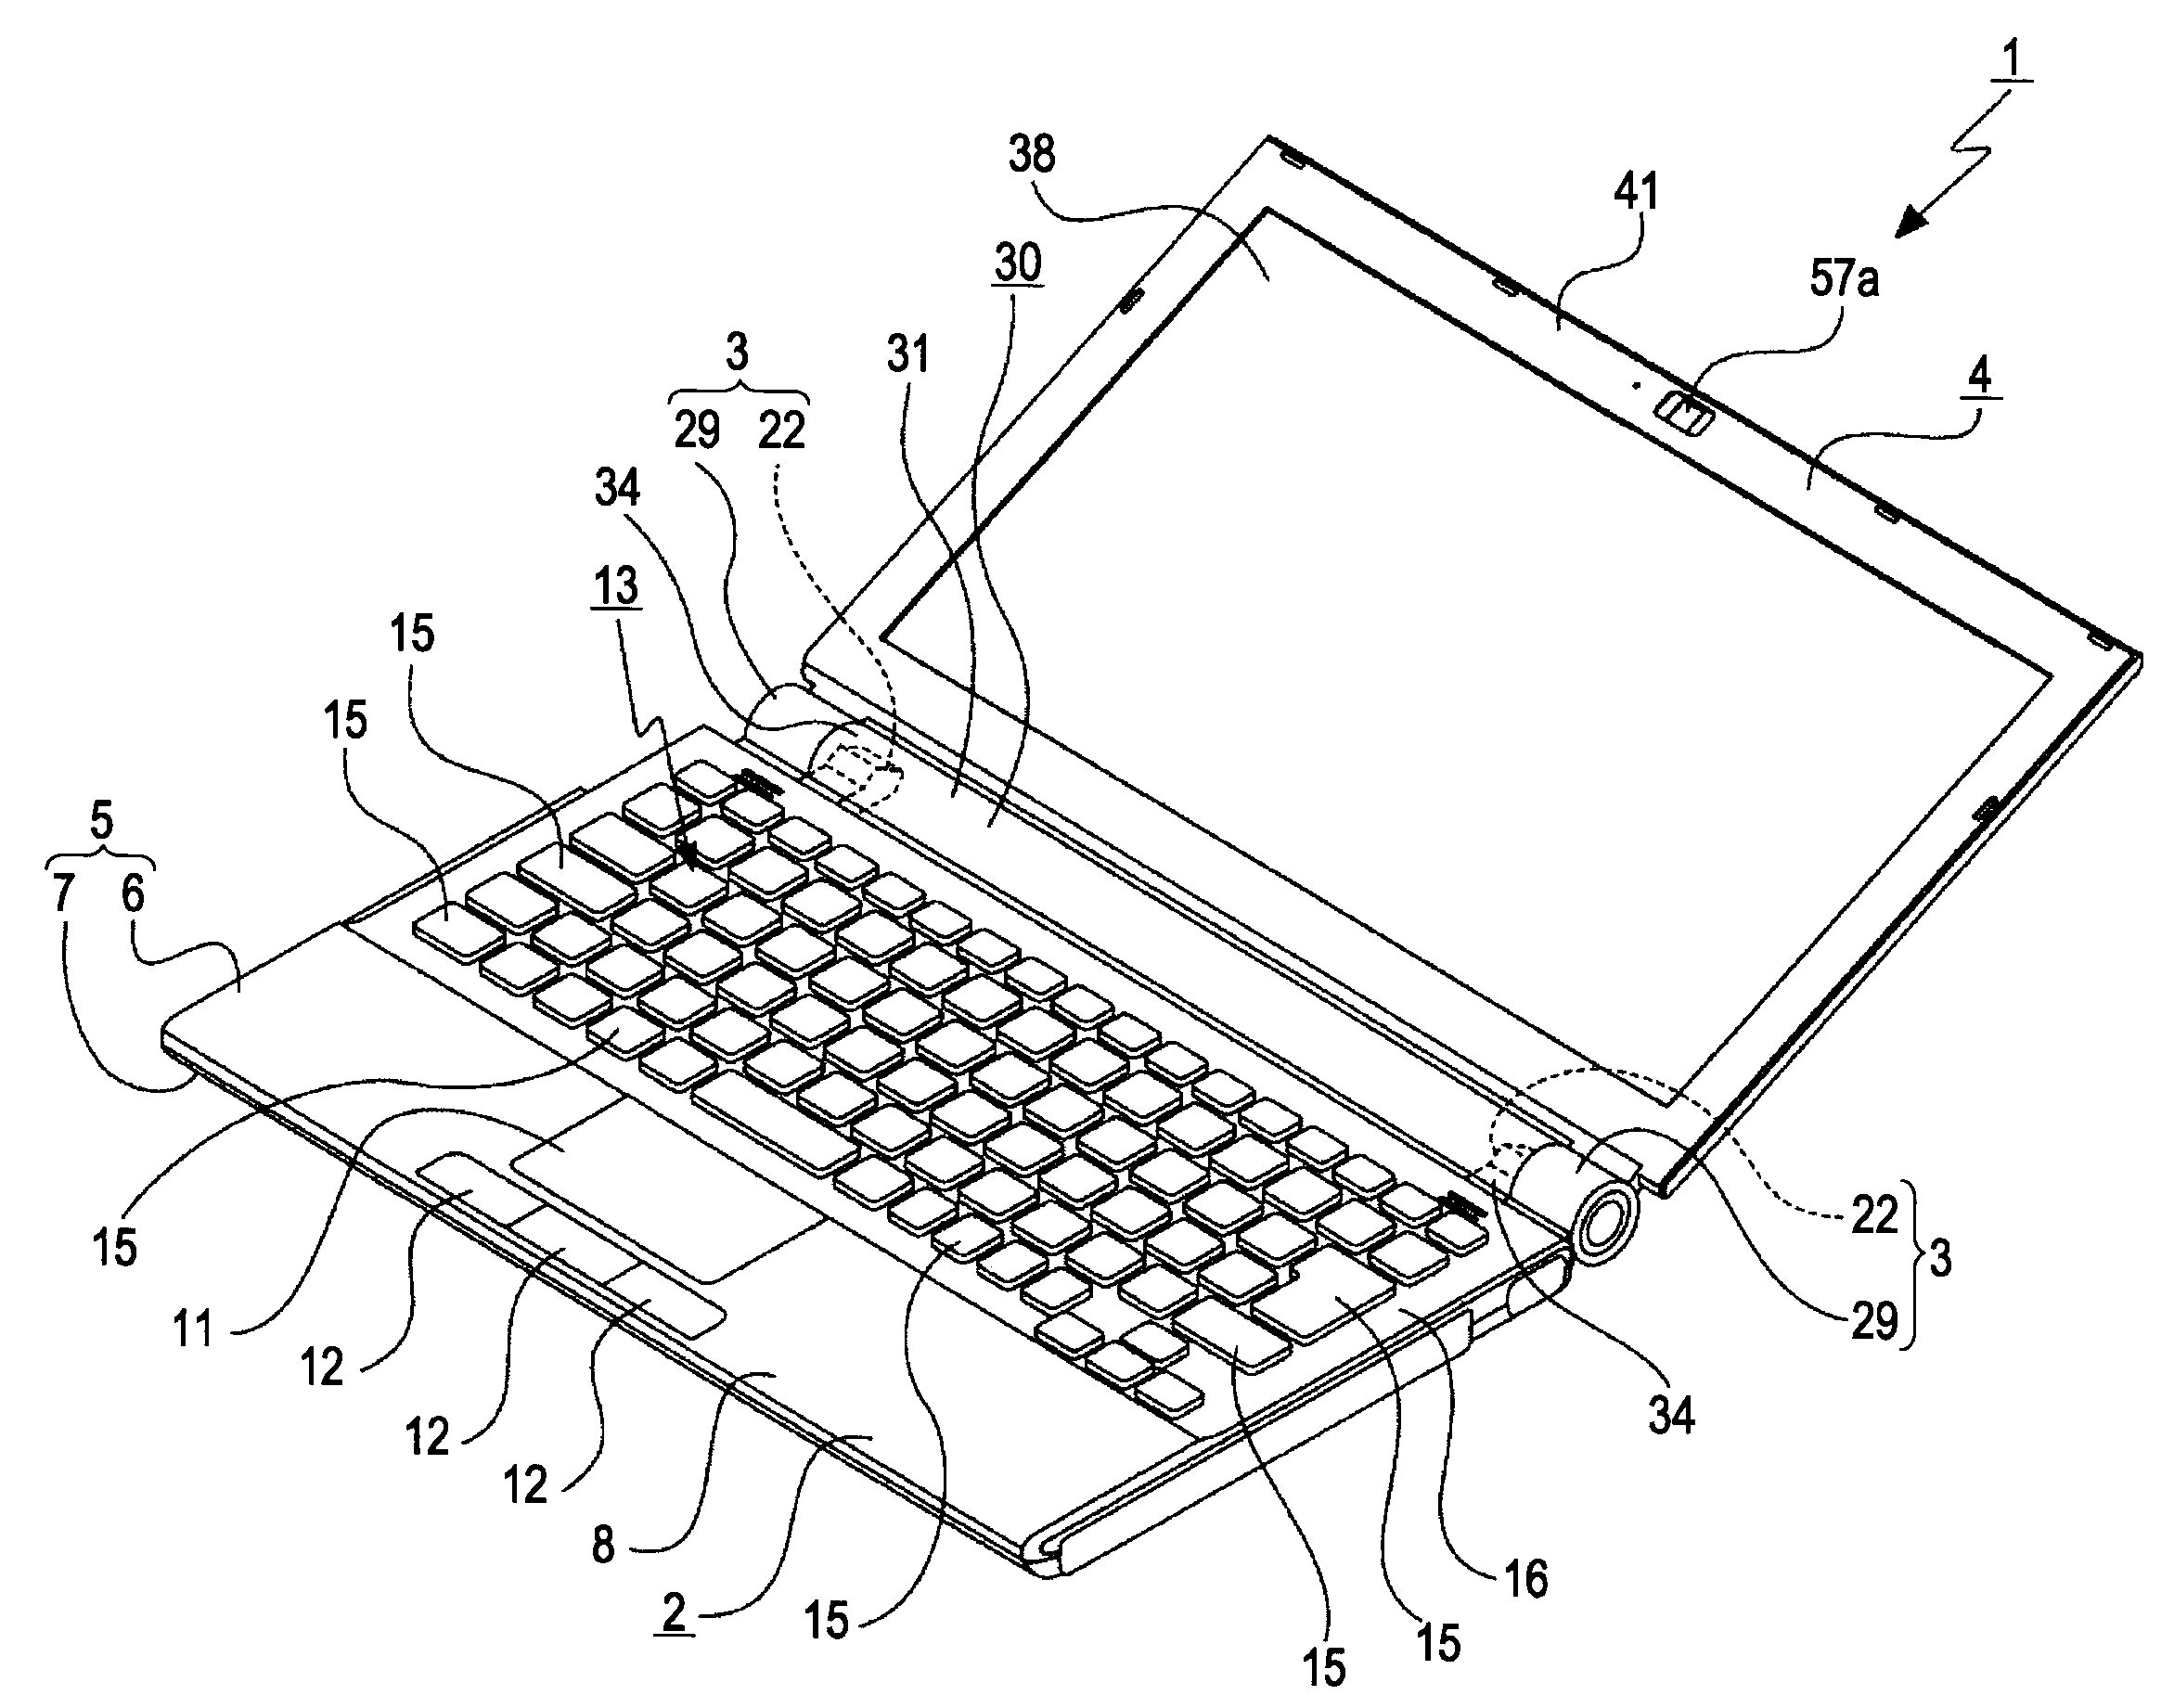 Keyboard connection configuration and electronic device